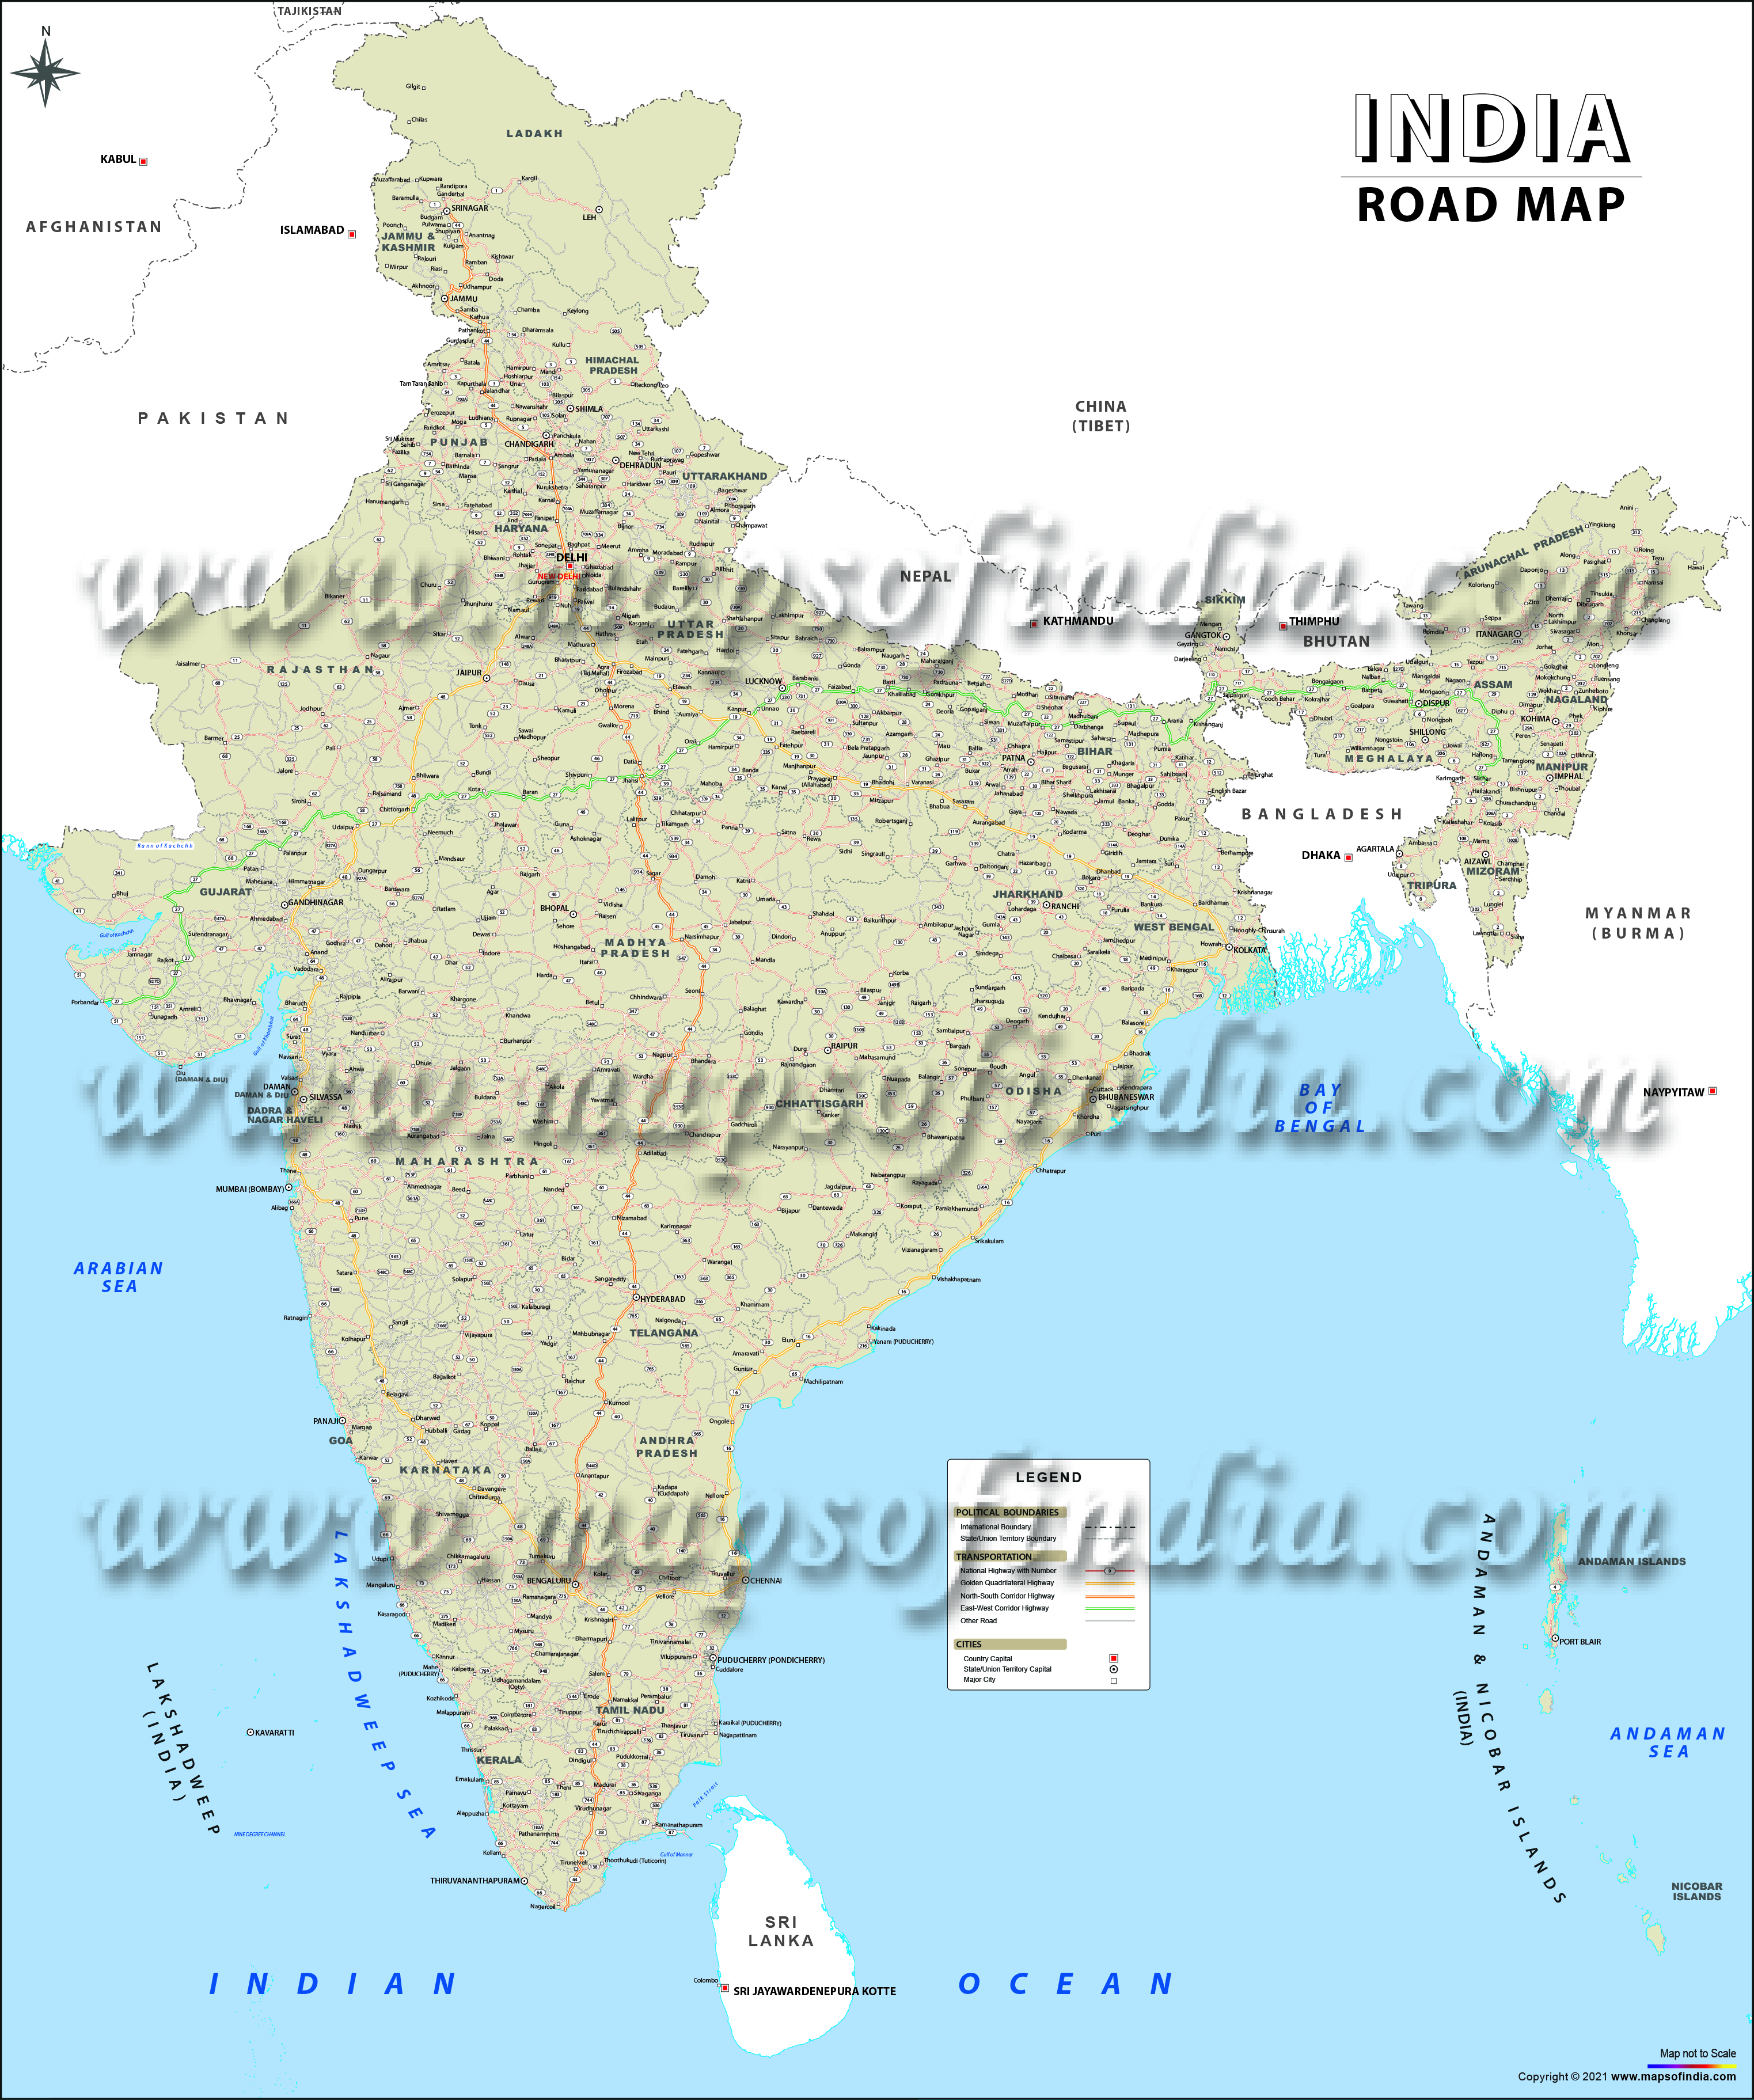 India Map Road Route India Road Maps, Indian Road Network, List of Expressways India